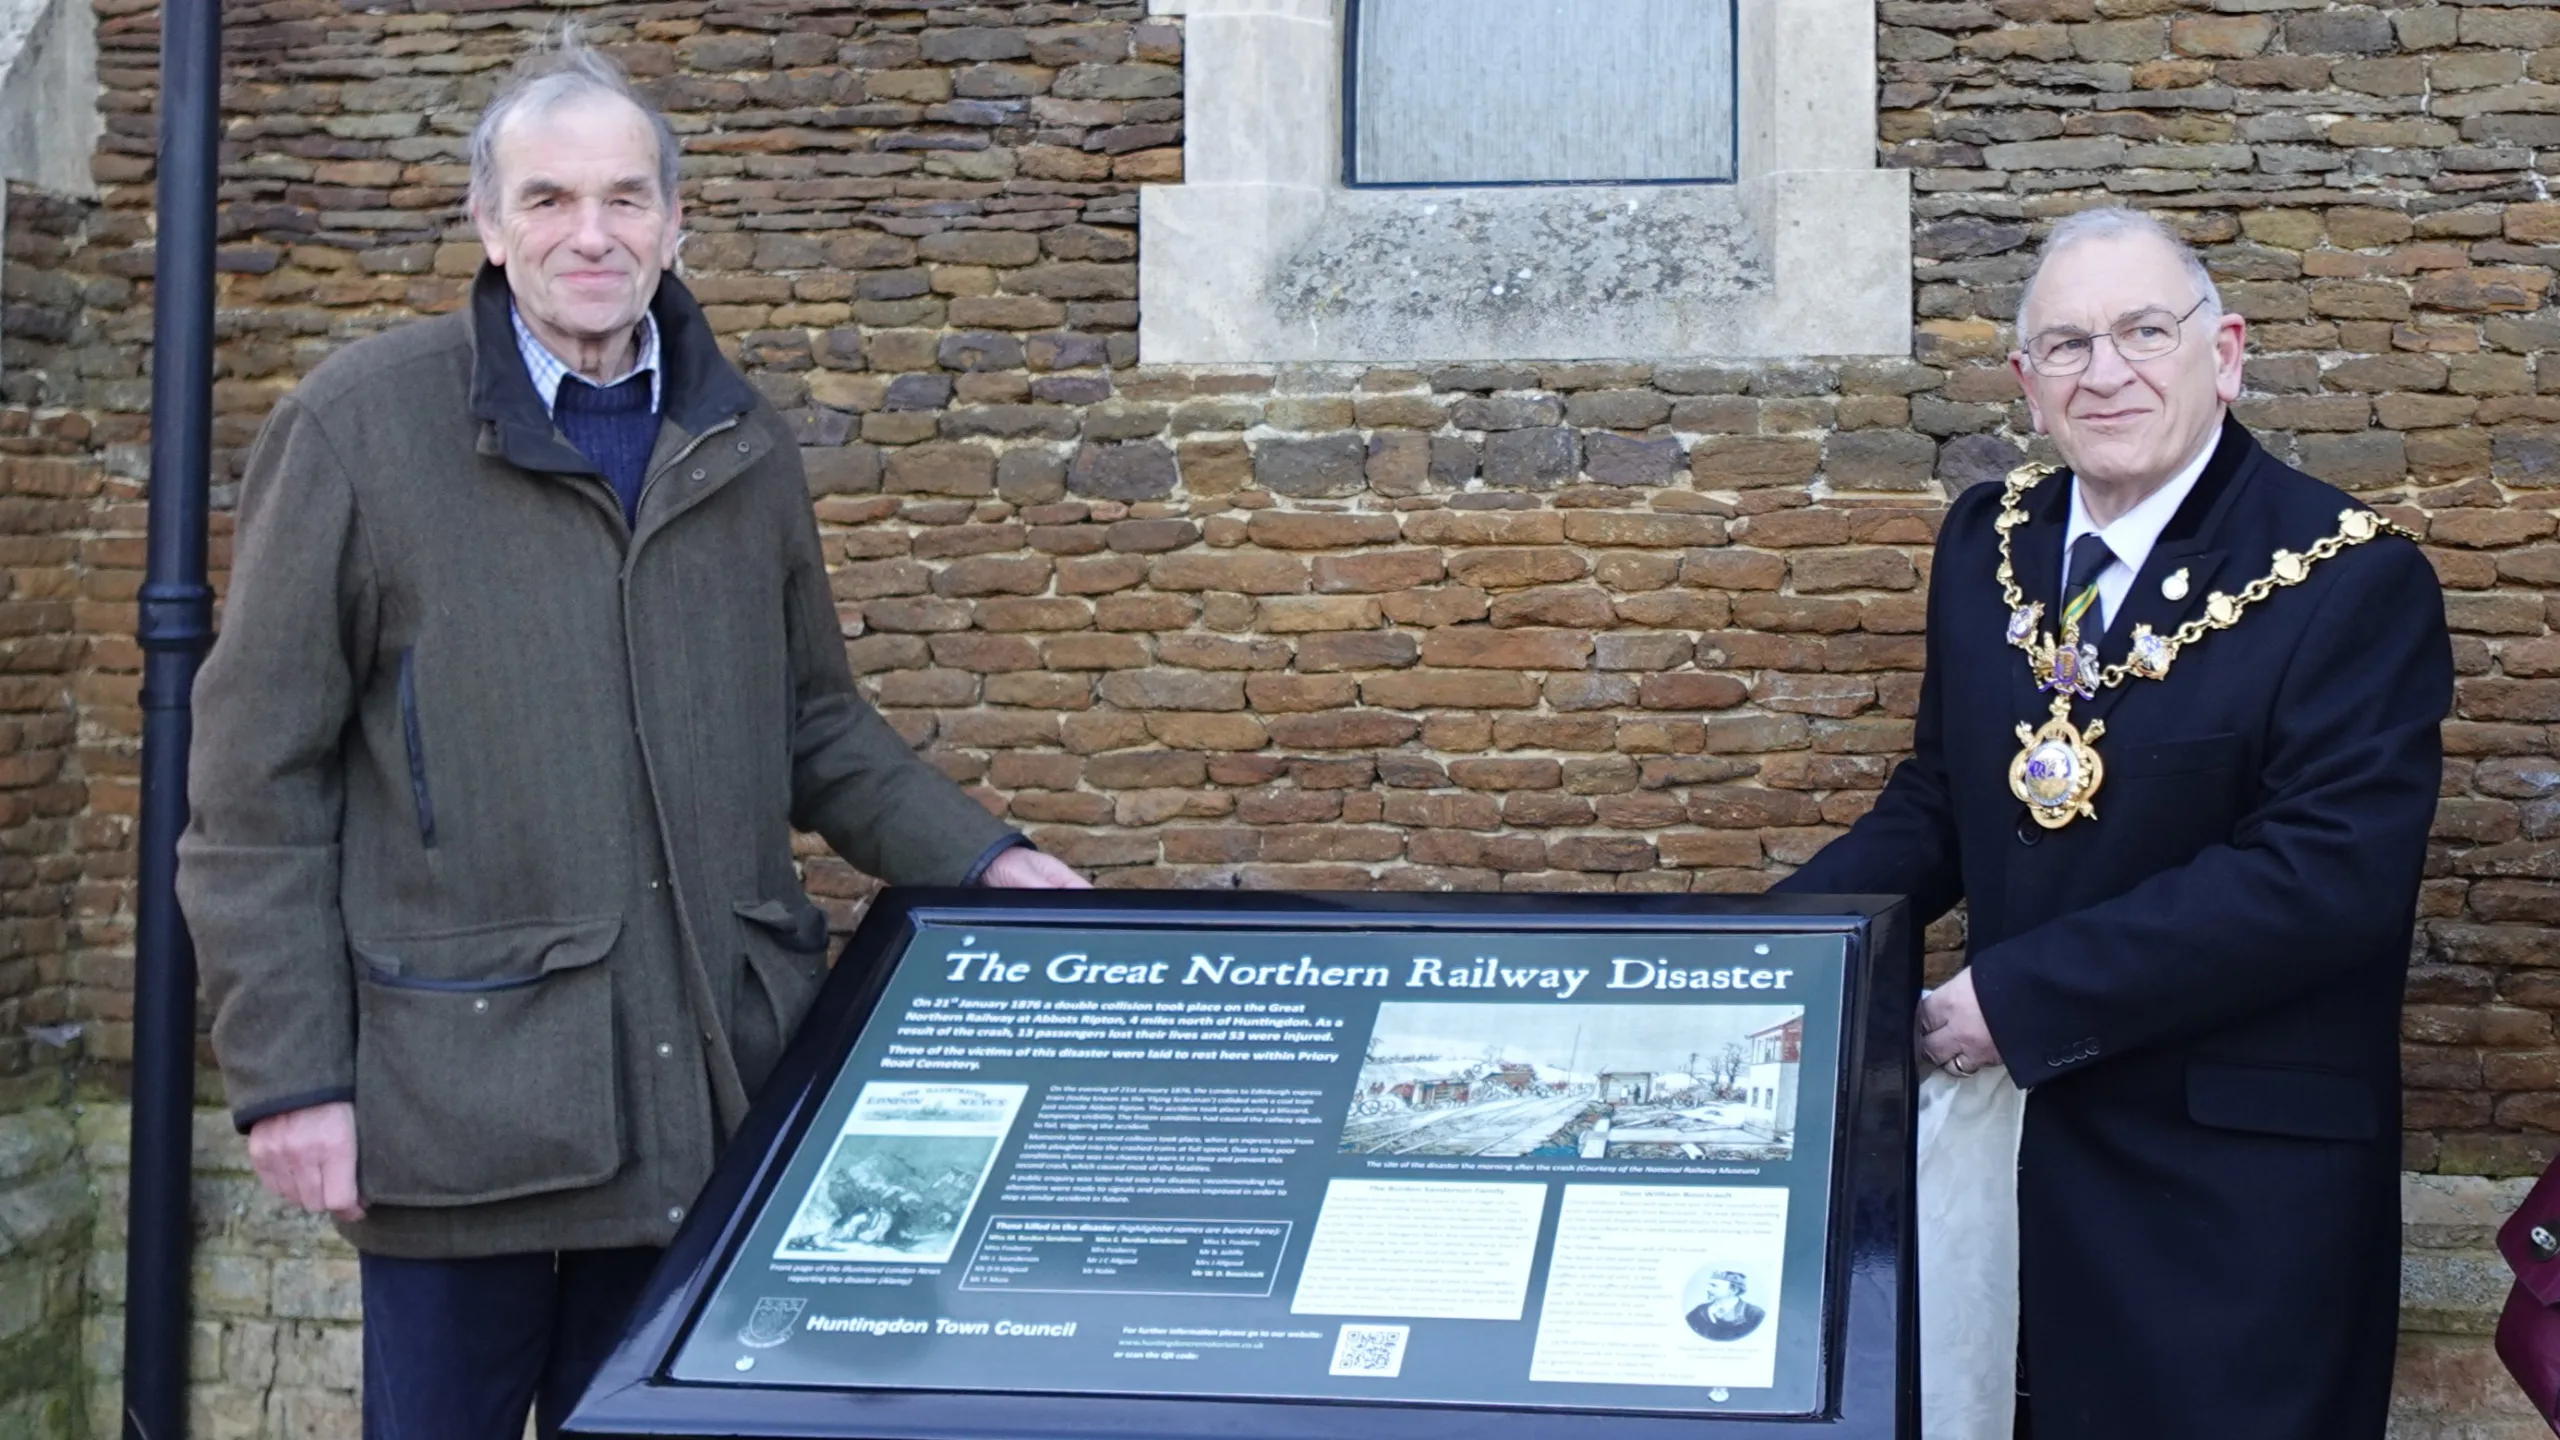 The newly installed interpretation board was unveiled by Cllr Phil Pearce, Mayor of Huntingdon, and Charles Saunders, who recently restored the grave of victim Dion William Boucicault.